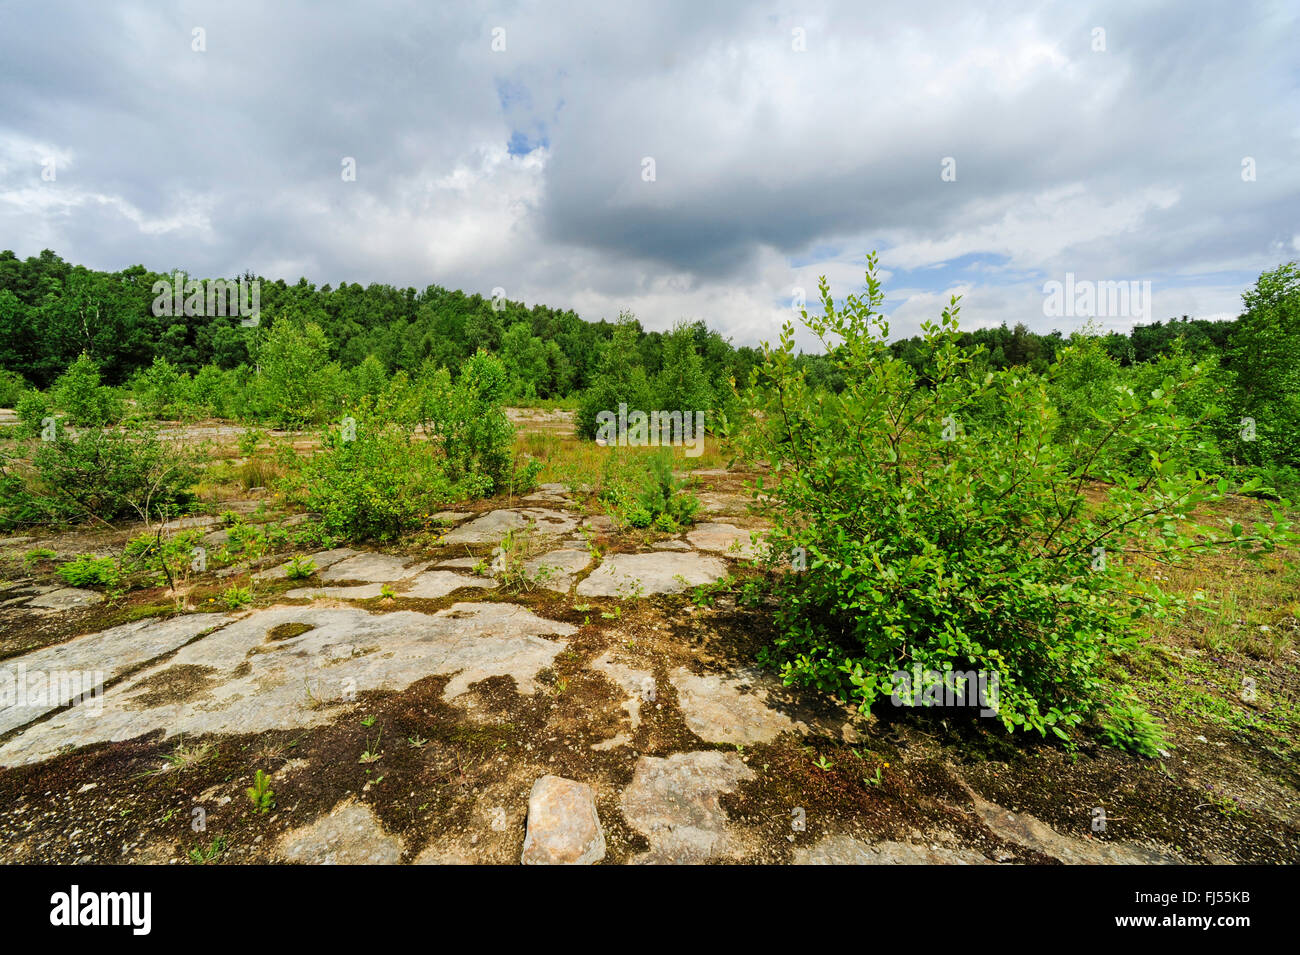 closed area of the stone pit Obernkirchen, Germany, Lower Saxony, Obernkirchener Sandsteinbruch Stock Photo